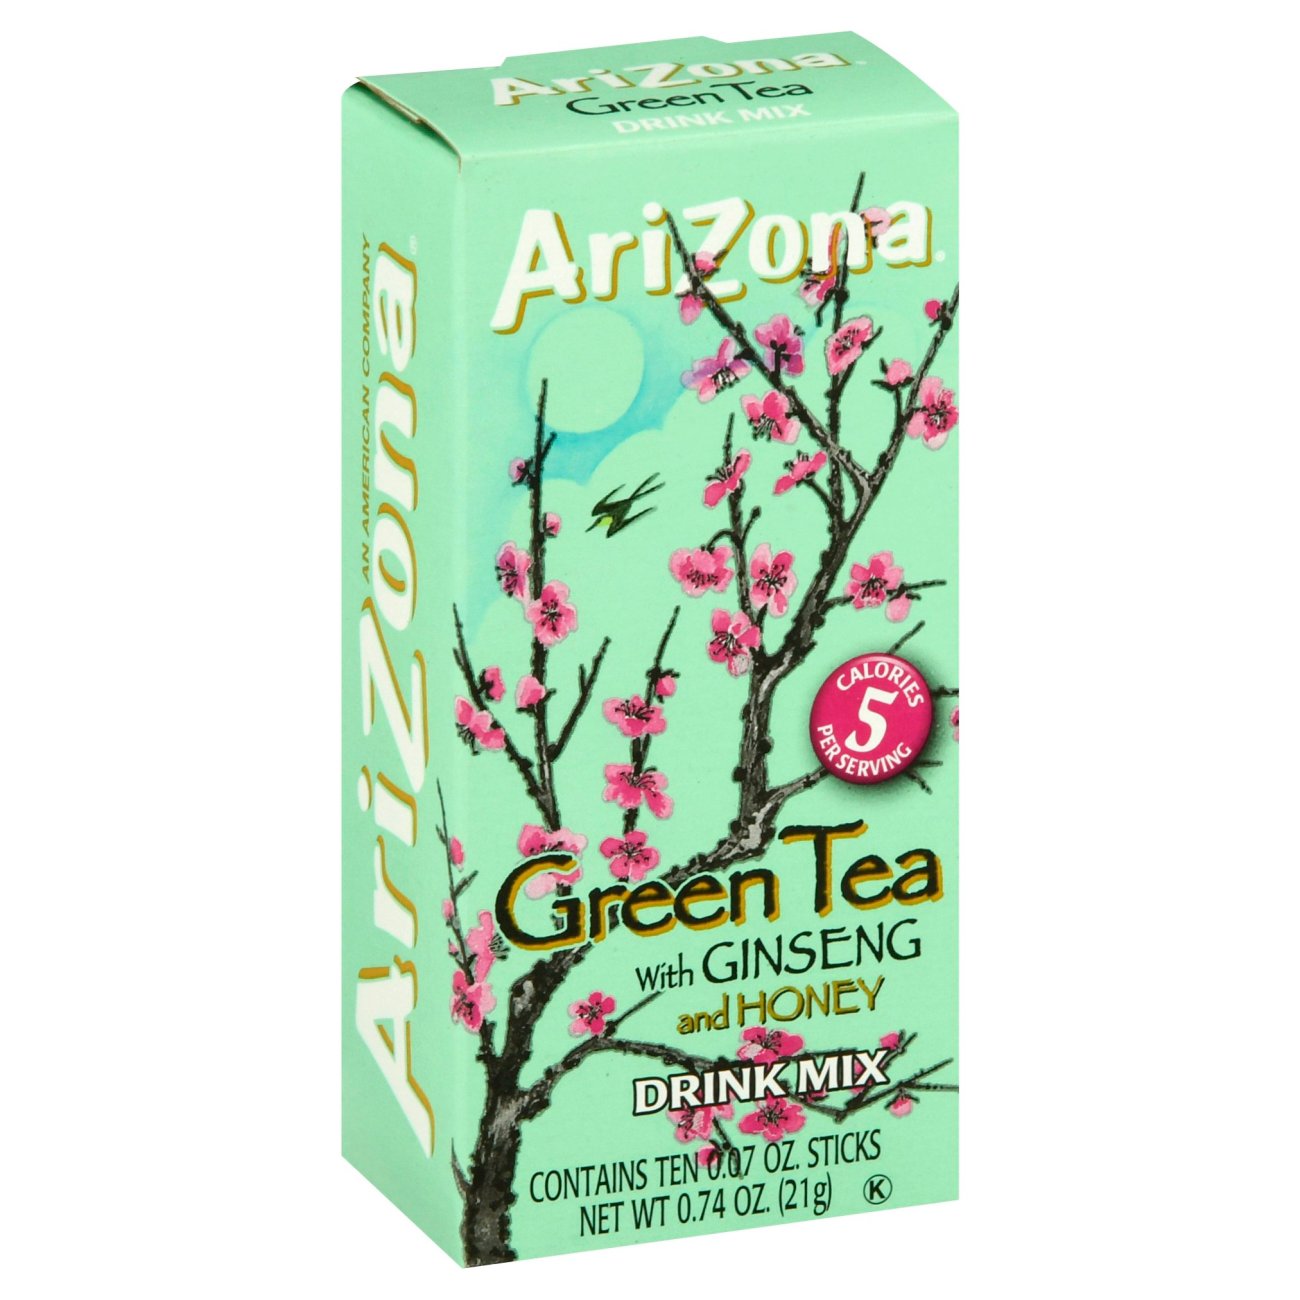 Arizona Green Tea with Ginseng and Honey Drink Mix